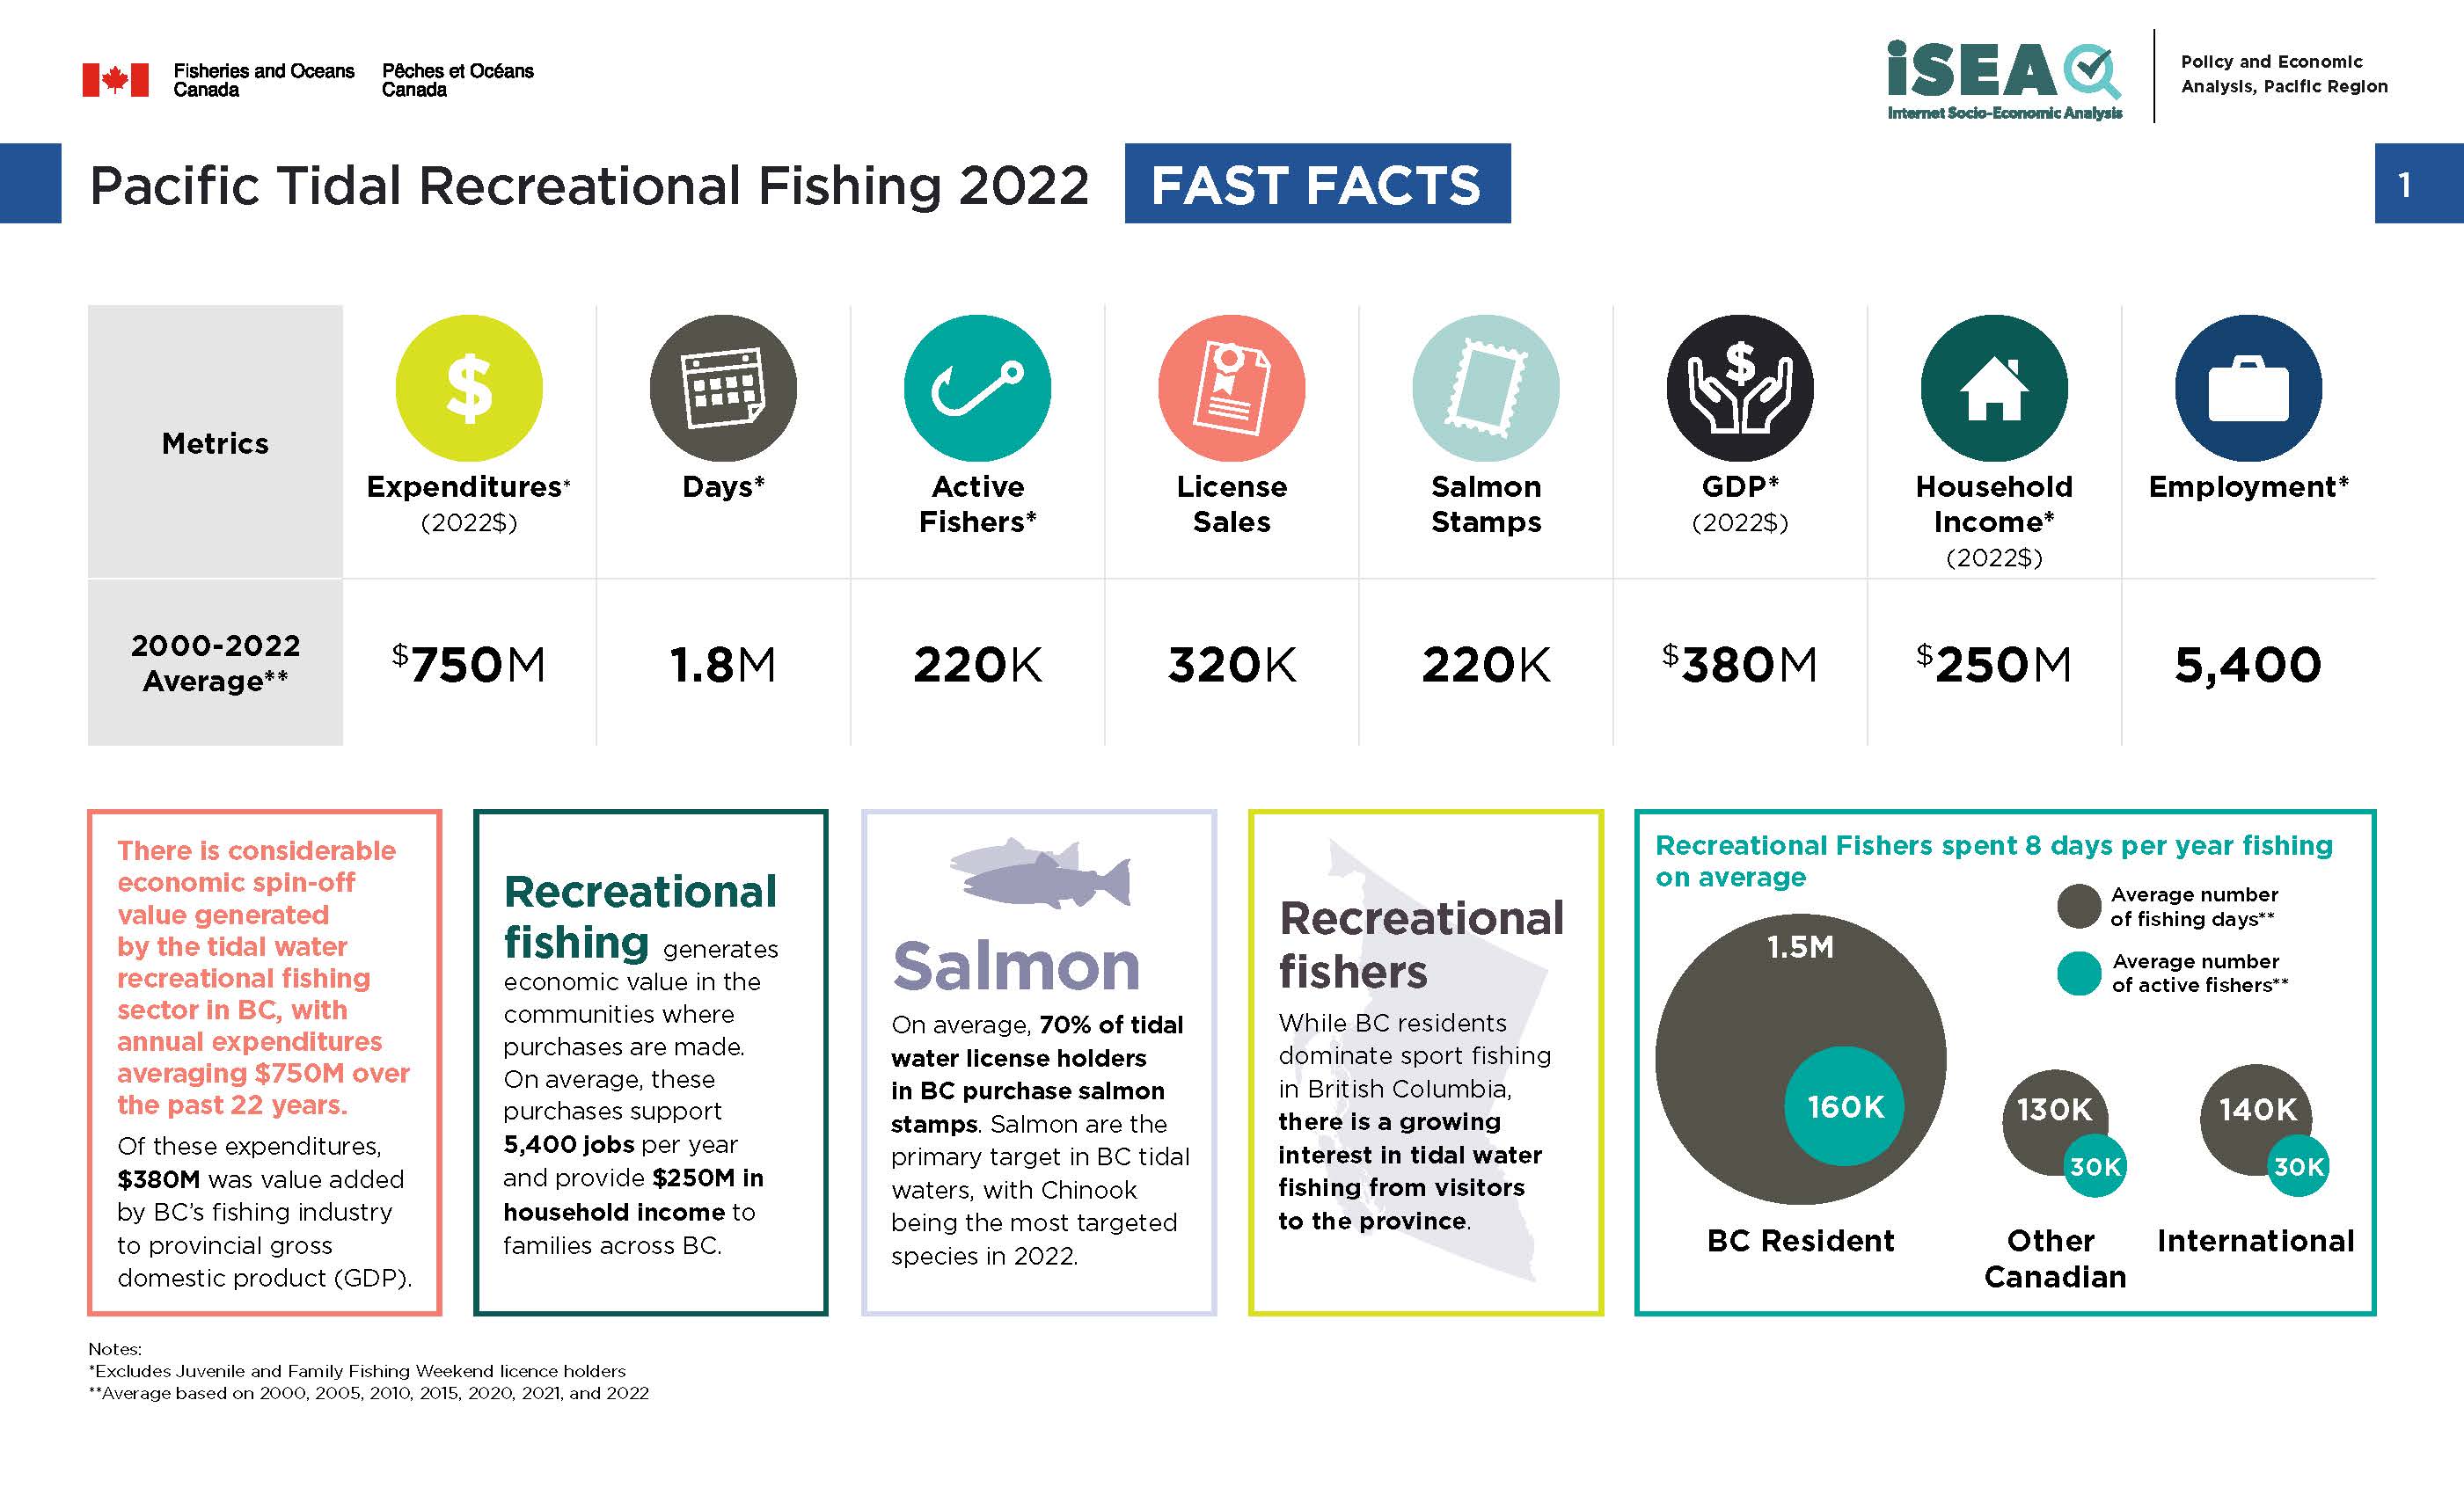 Photo: infographic of Pacific tidal recreational fishing 2000 to 2022, fast facts